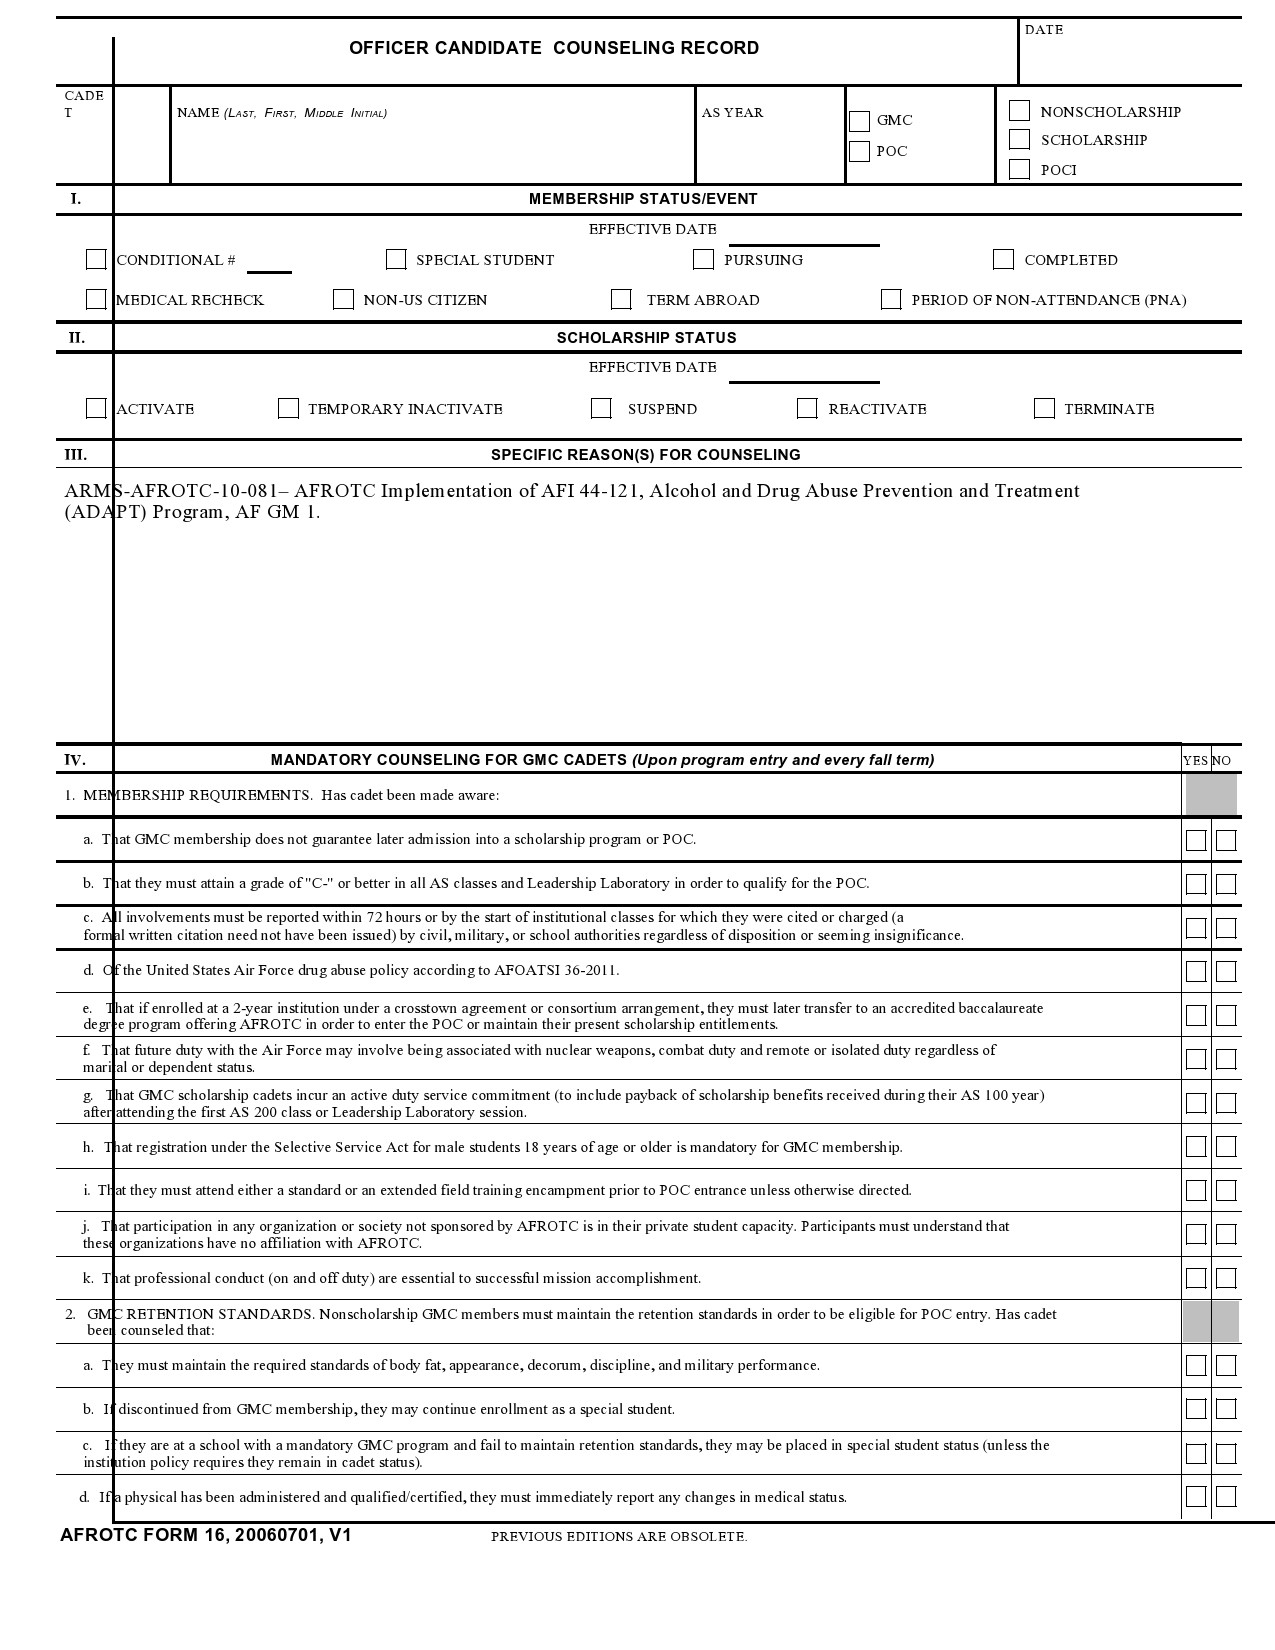 Free army counseling form 25